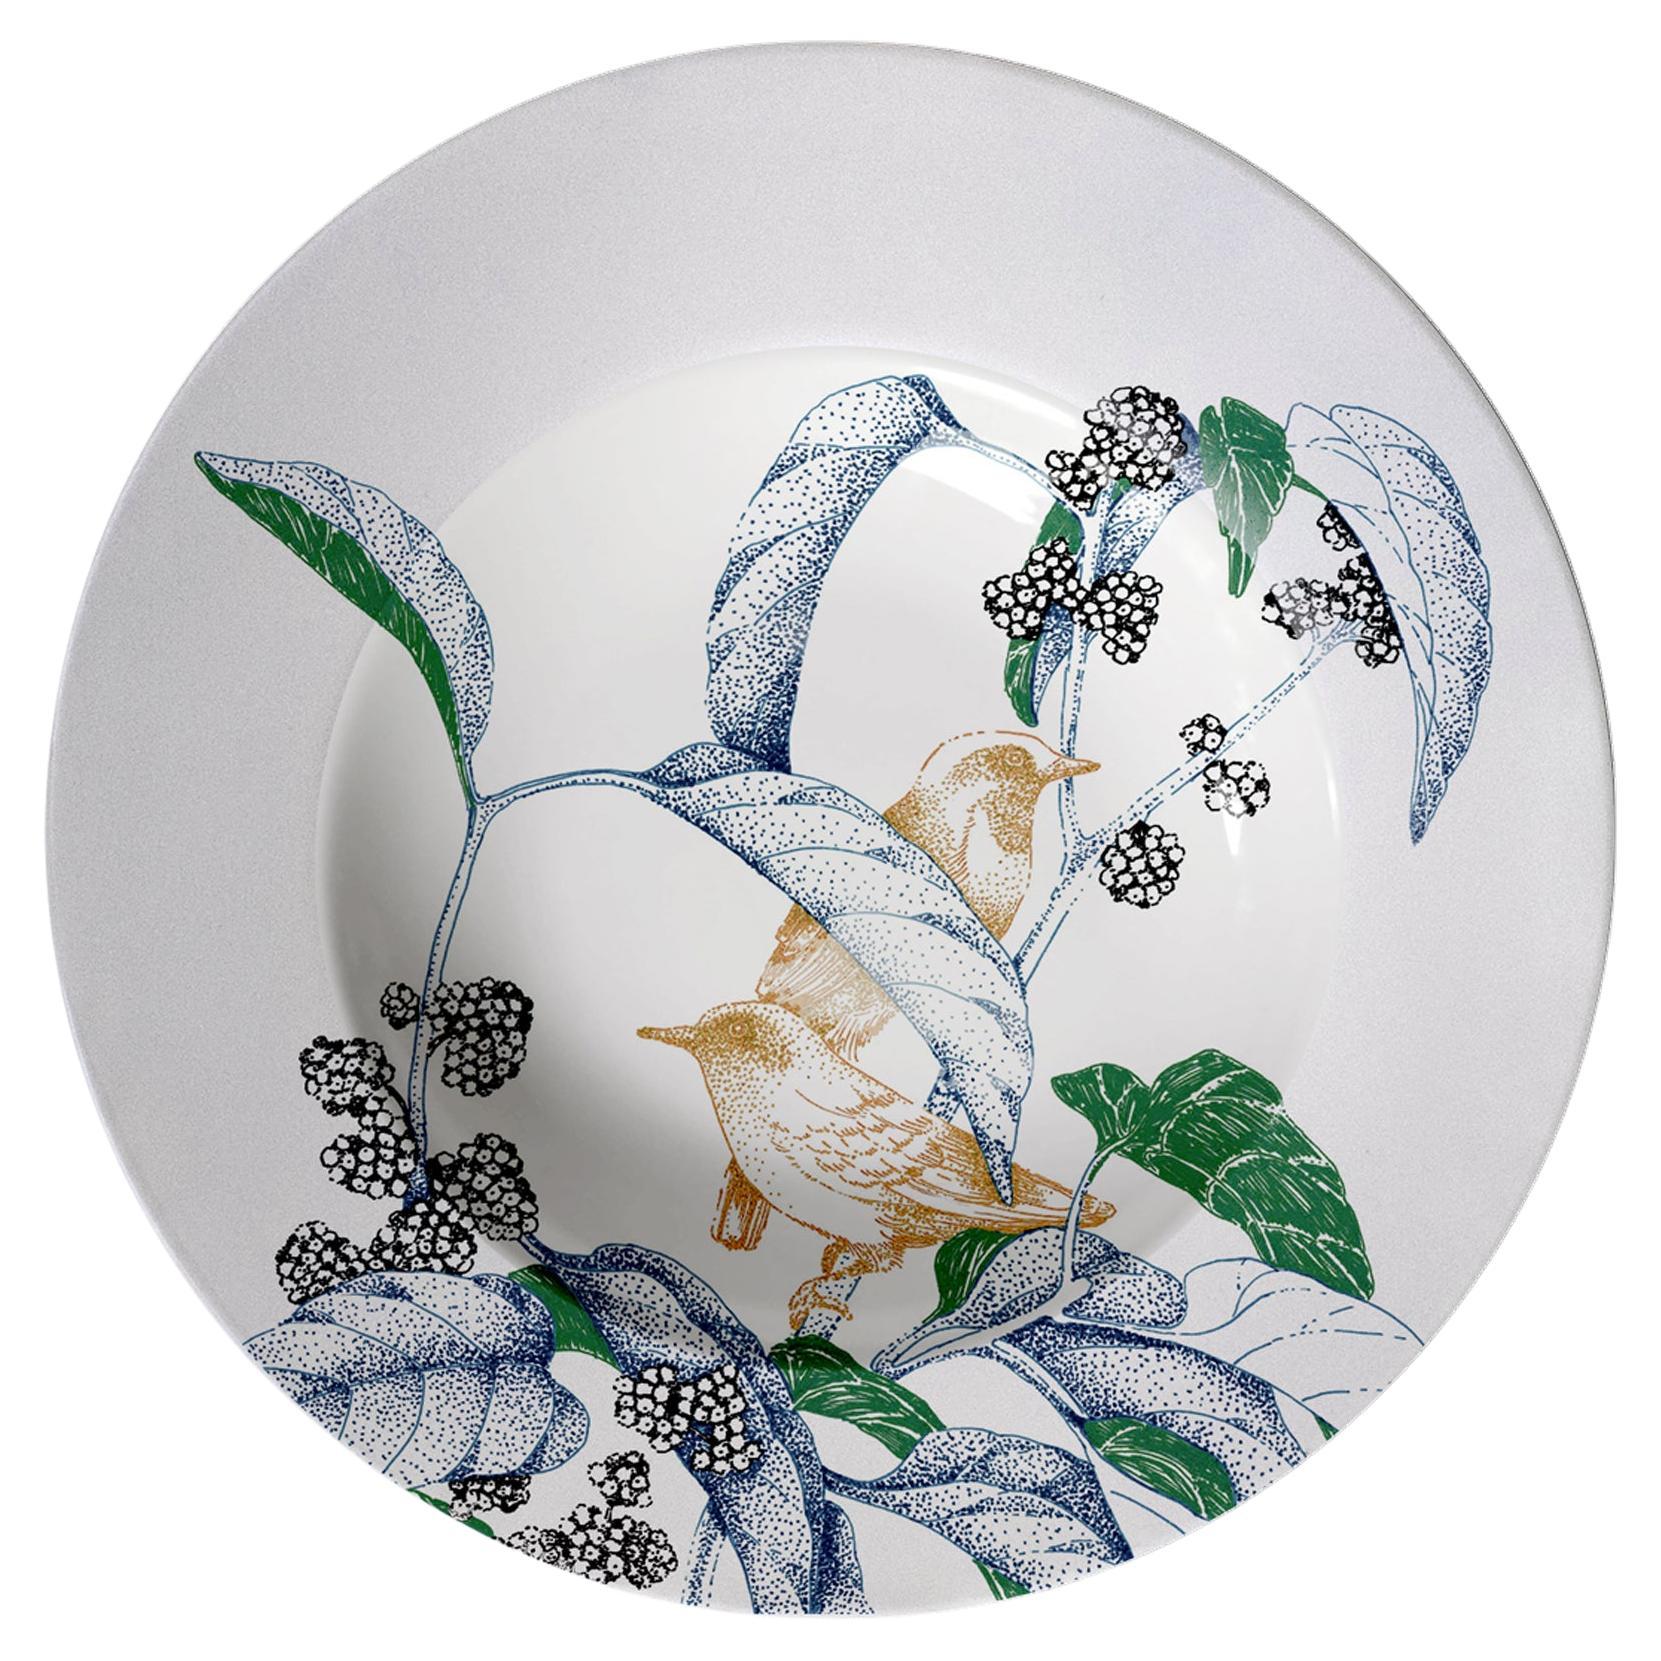 Bird Song, Contemporary Porcelain Pasta Plate with Birds and Flowers For Sale